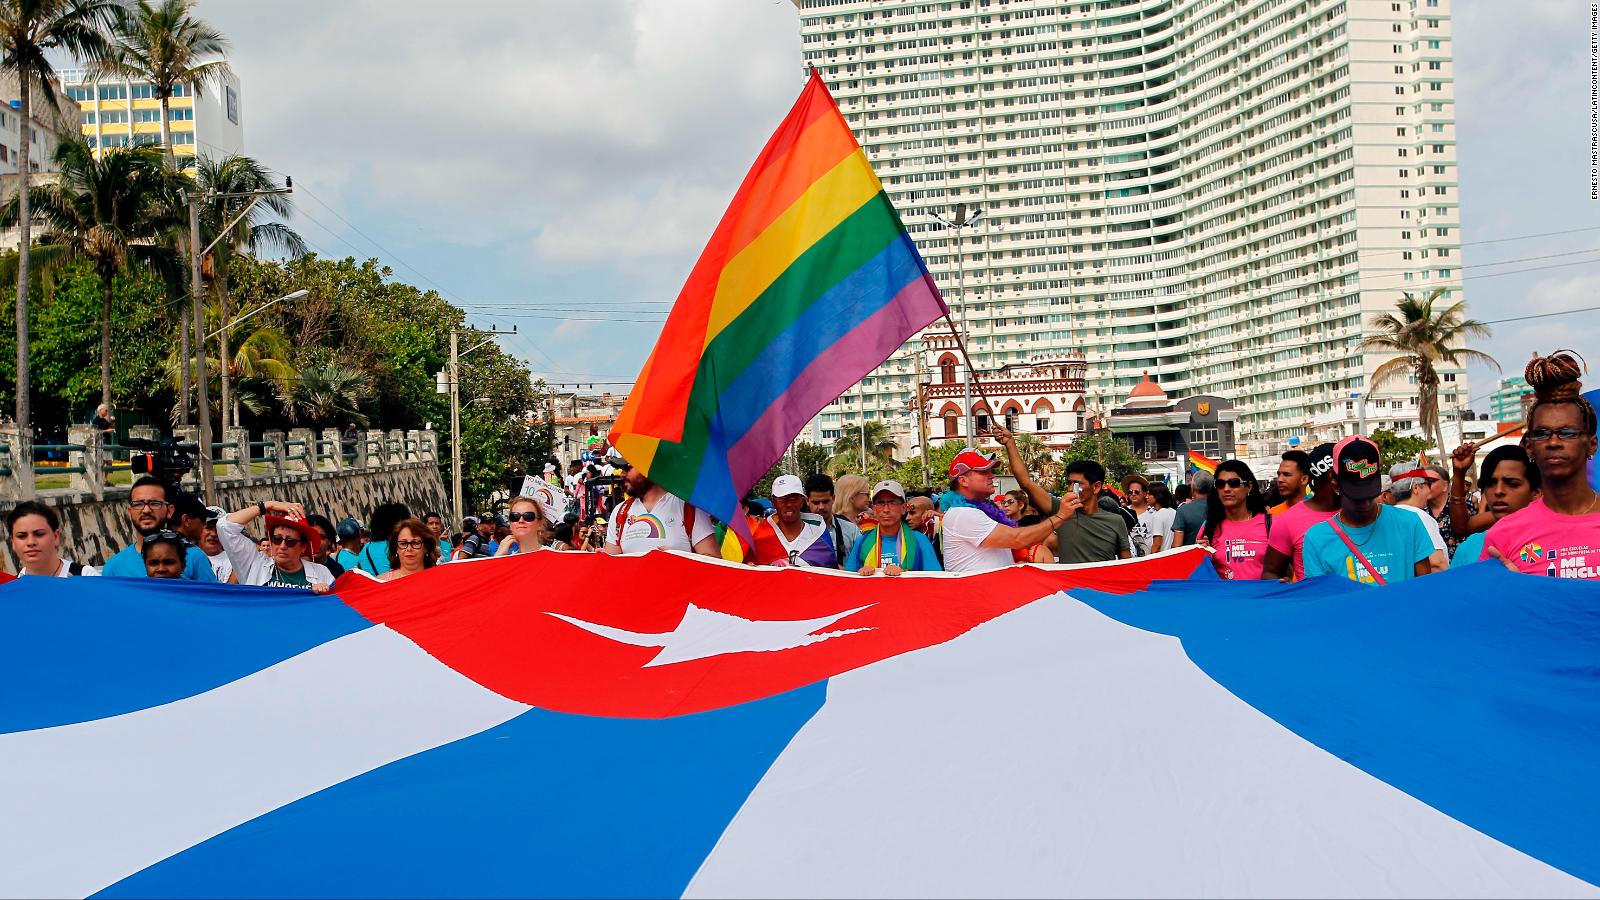 Cuba S New Draft Constitution Could Pave Way For Same Sex Marriage And